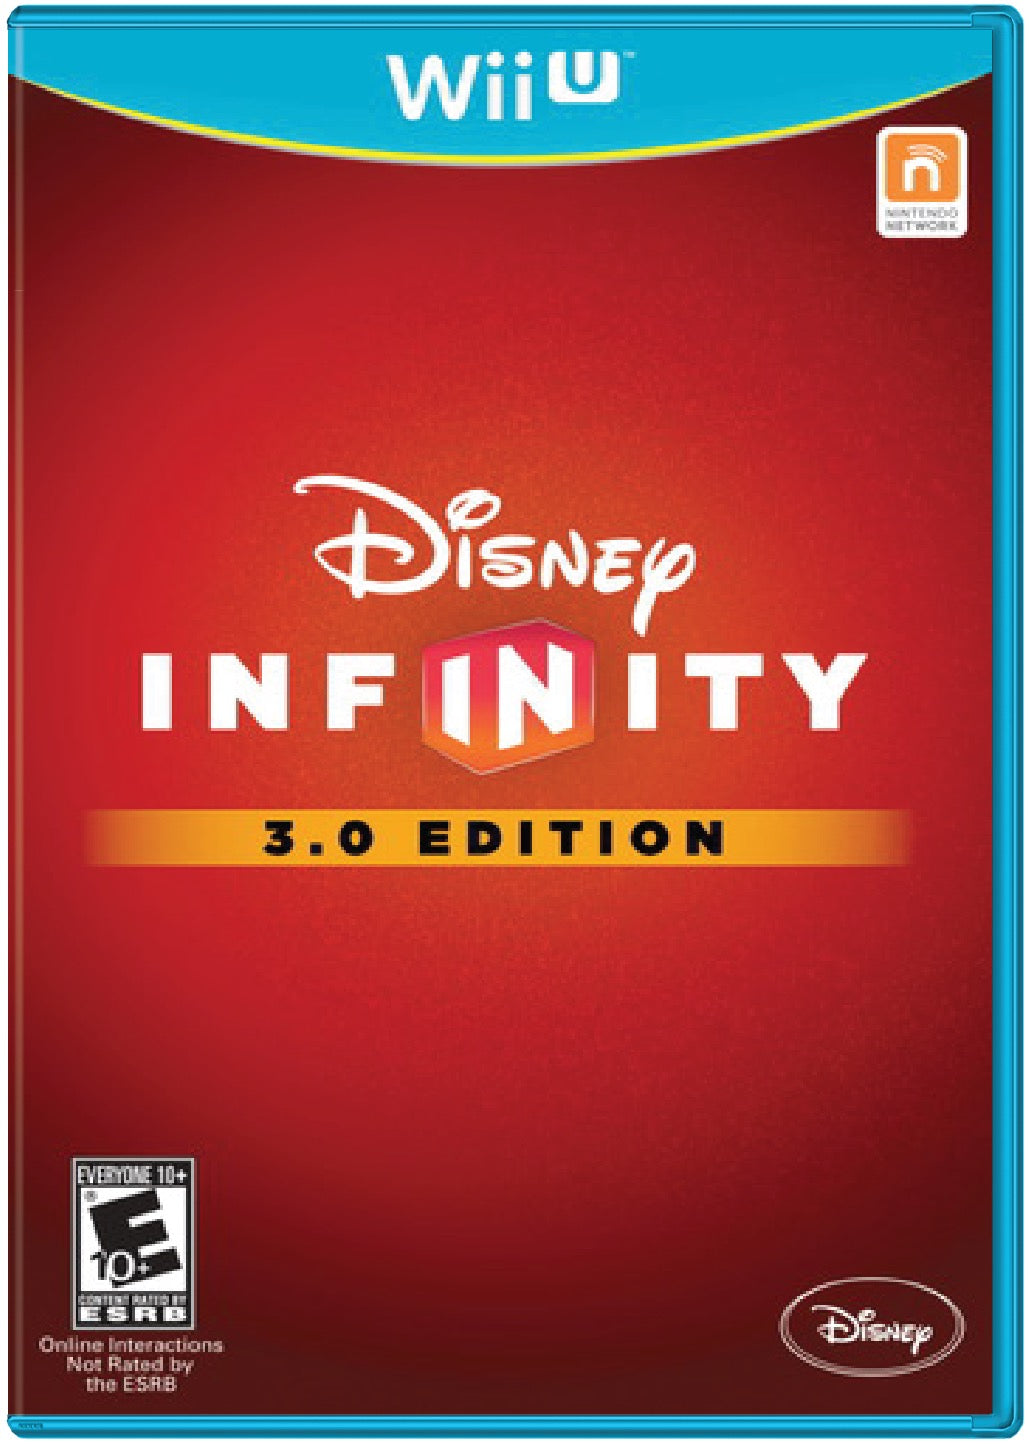 Disney Infinity 3.0 Edition Cover Art and Product Photo